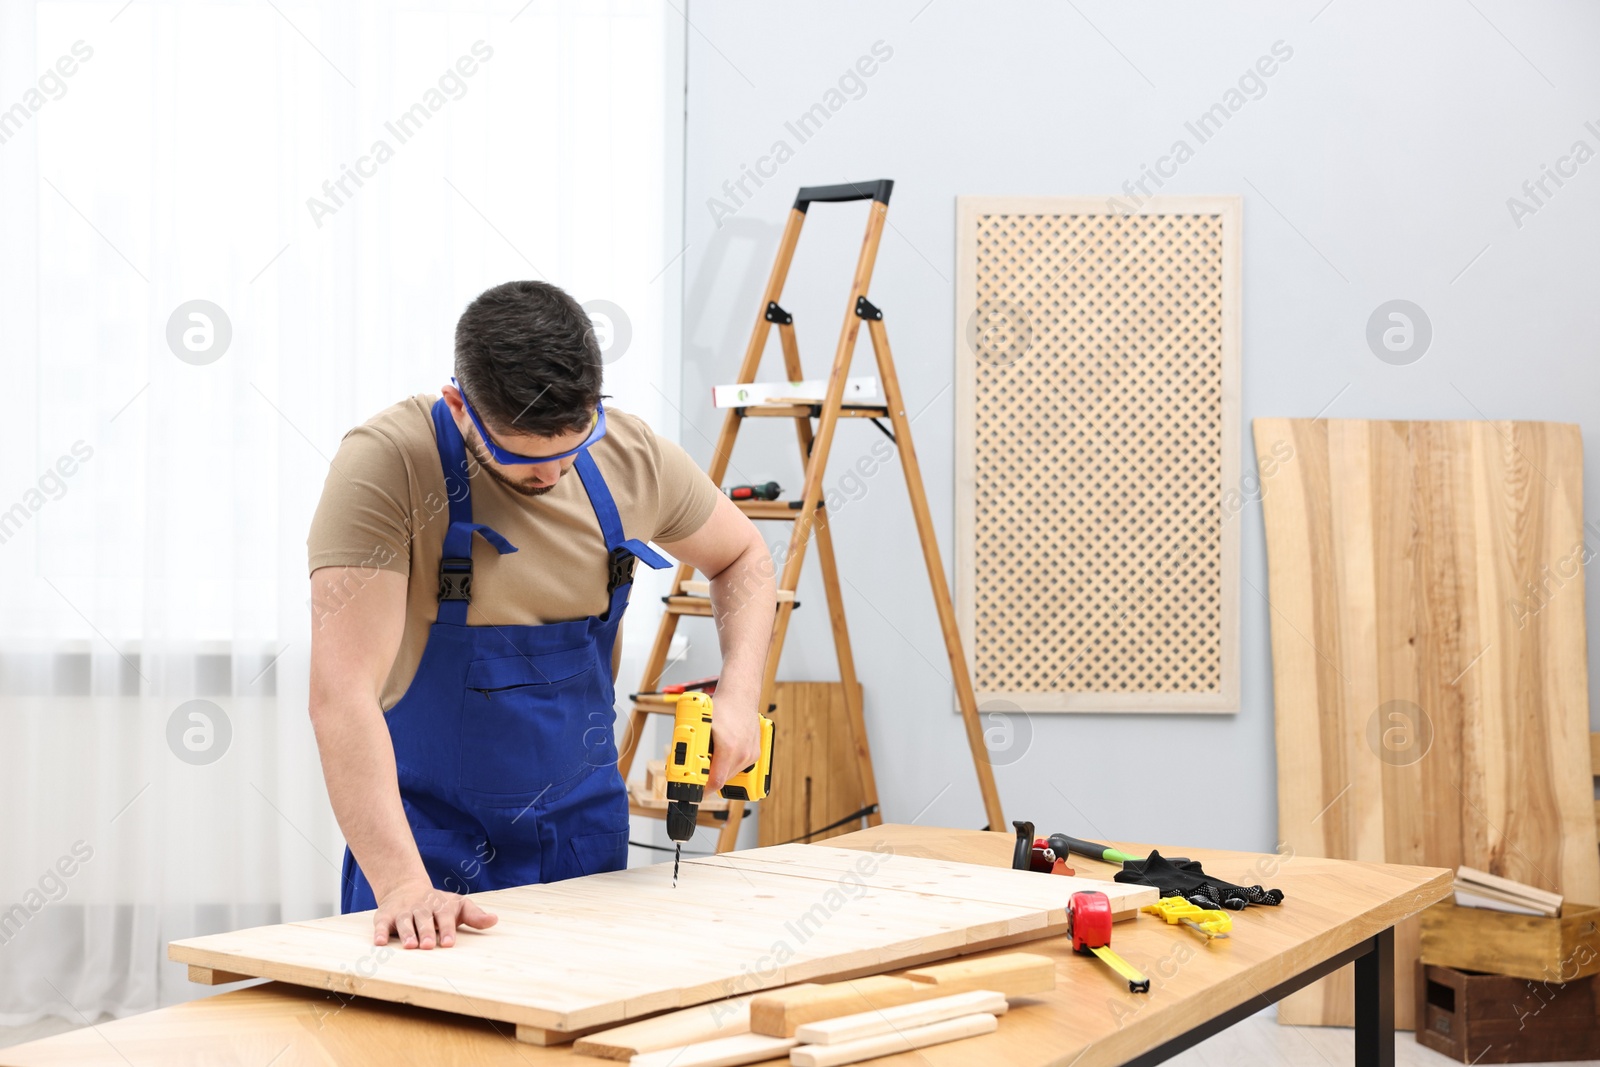 Photo of Young worker using electric drill at table in workshop